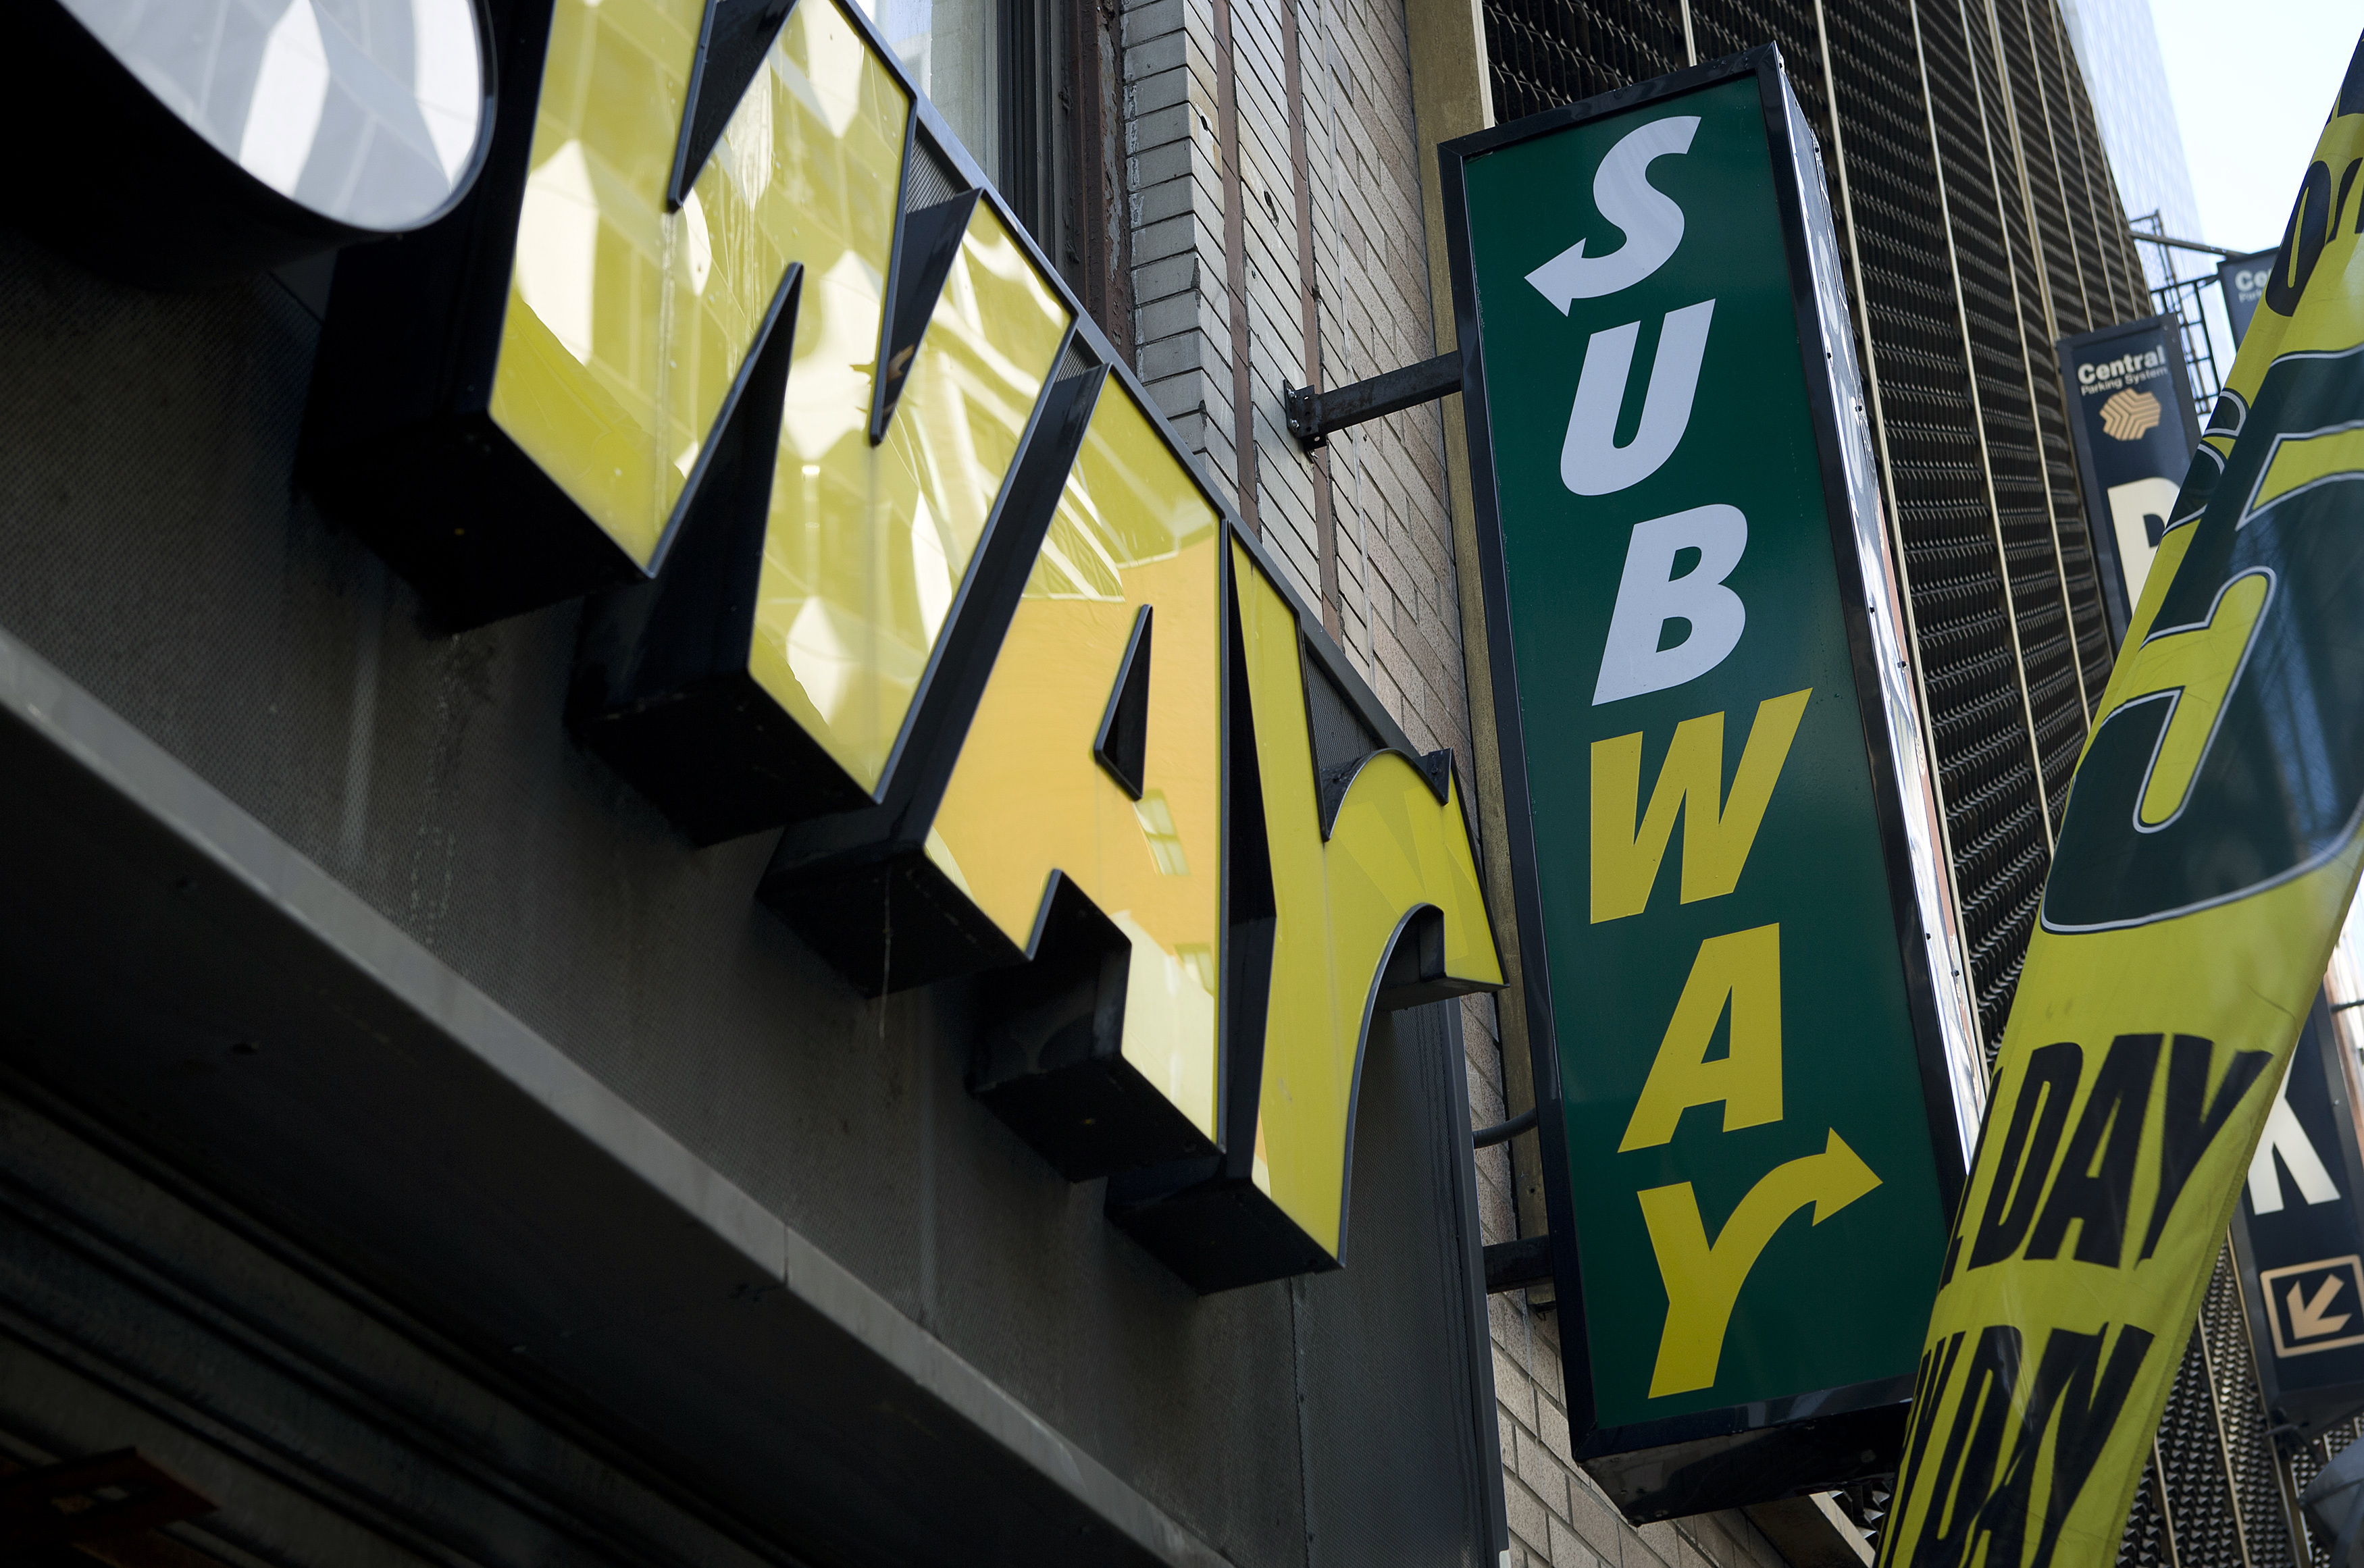 A Subway sandwich shop logo is pictured in the Manhattan borough of New York